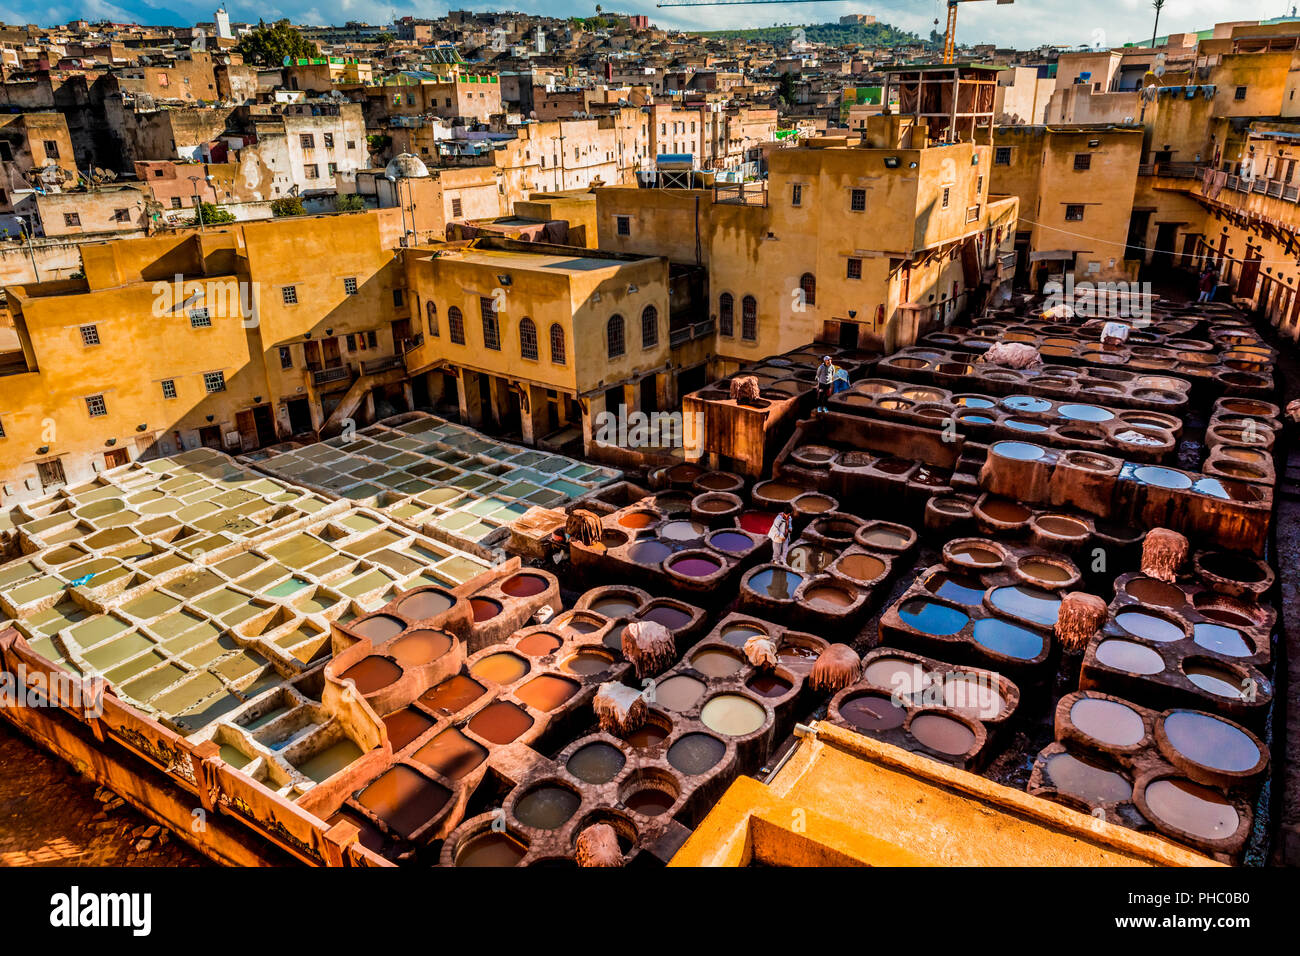 Dyeing vats, Tanneries, Fez, Morocco, North Africa, Africa Stock Photo